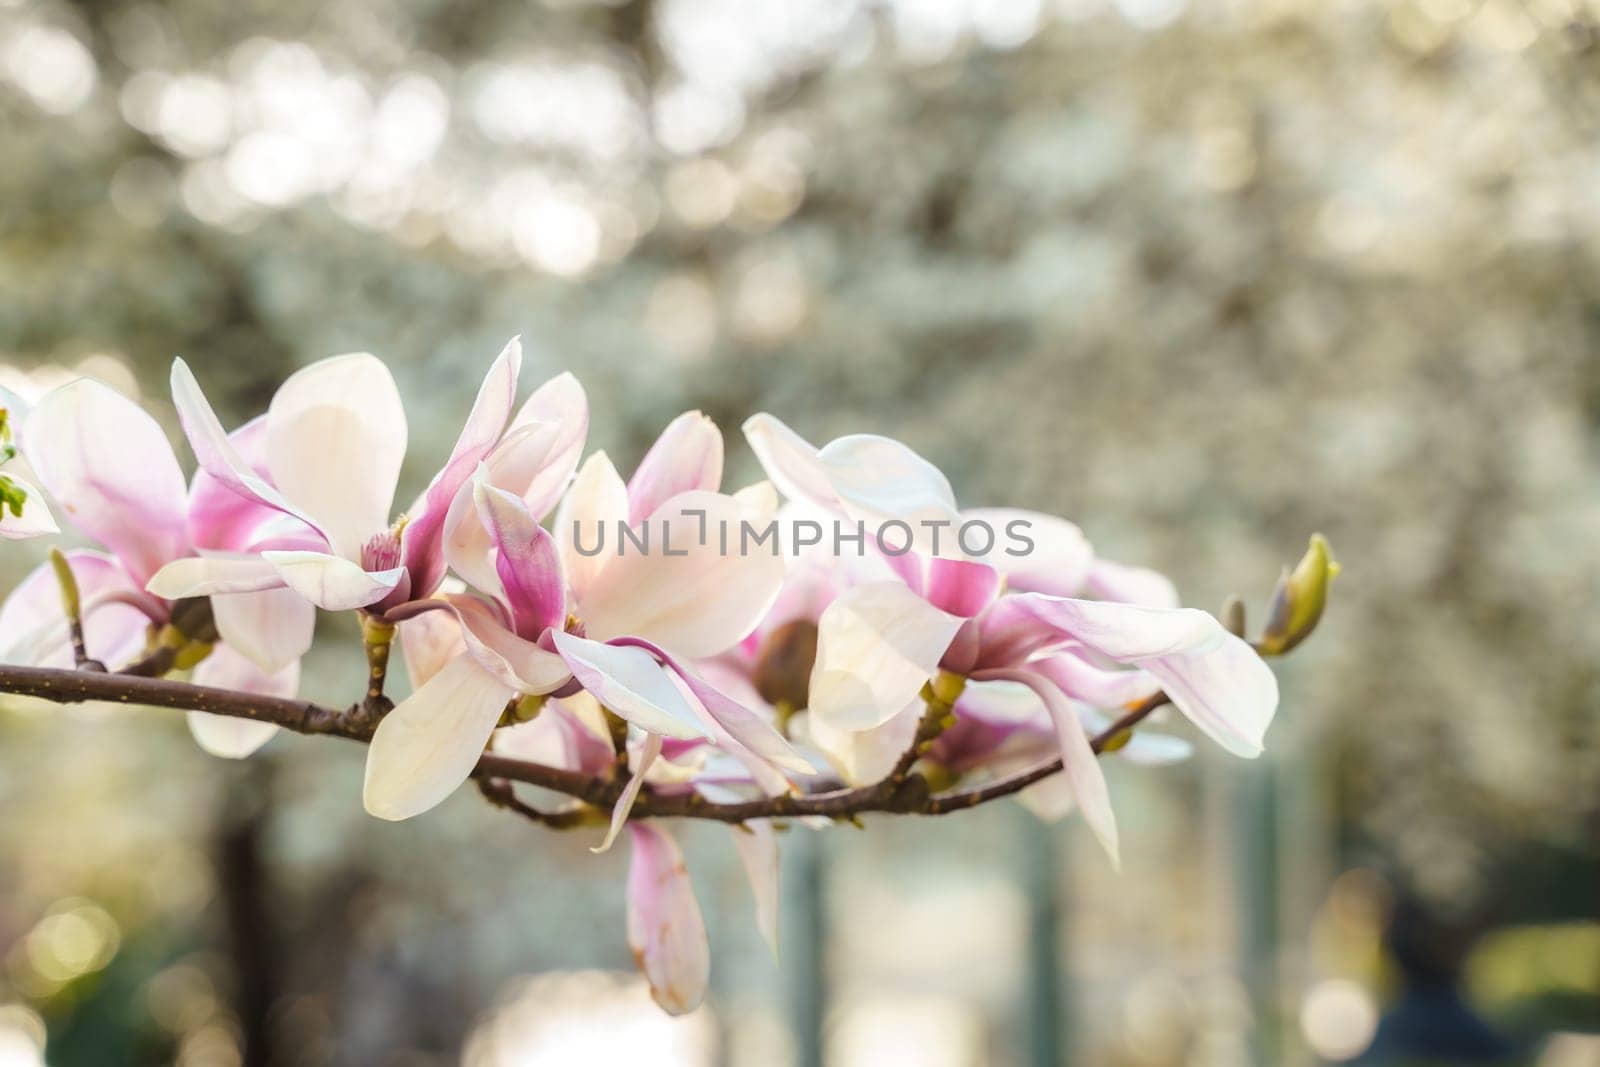 Flower magnolia blossoms on green grass background